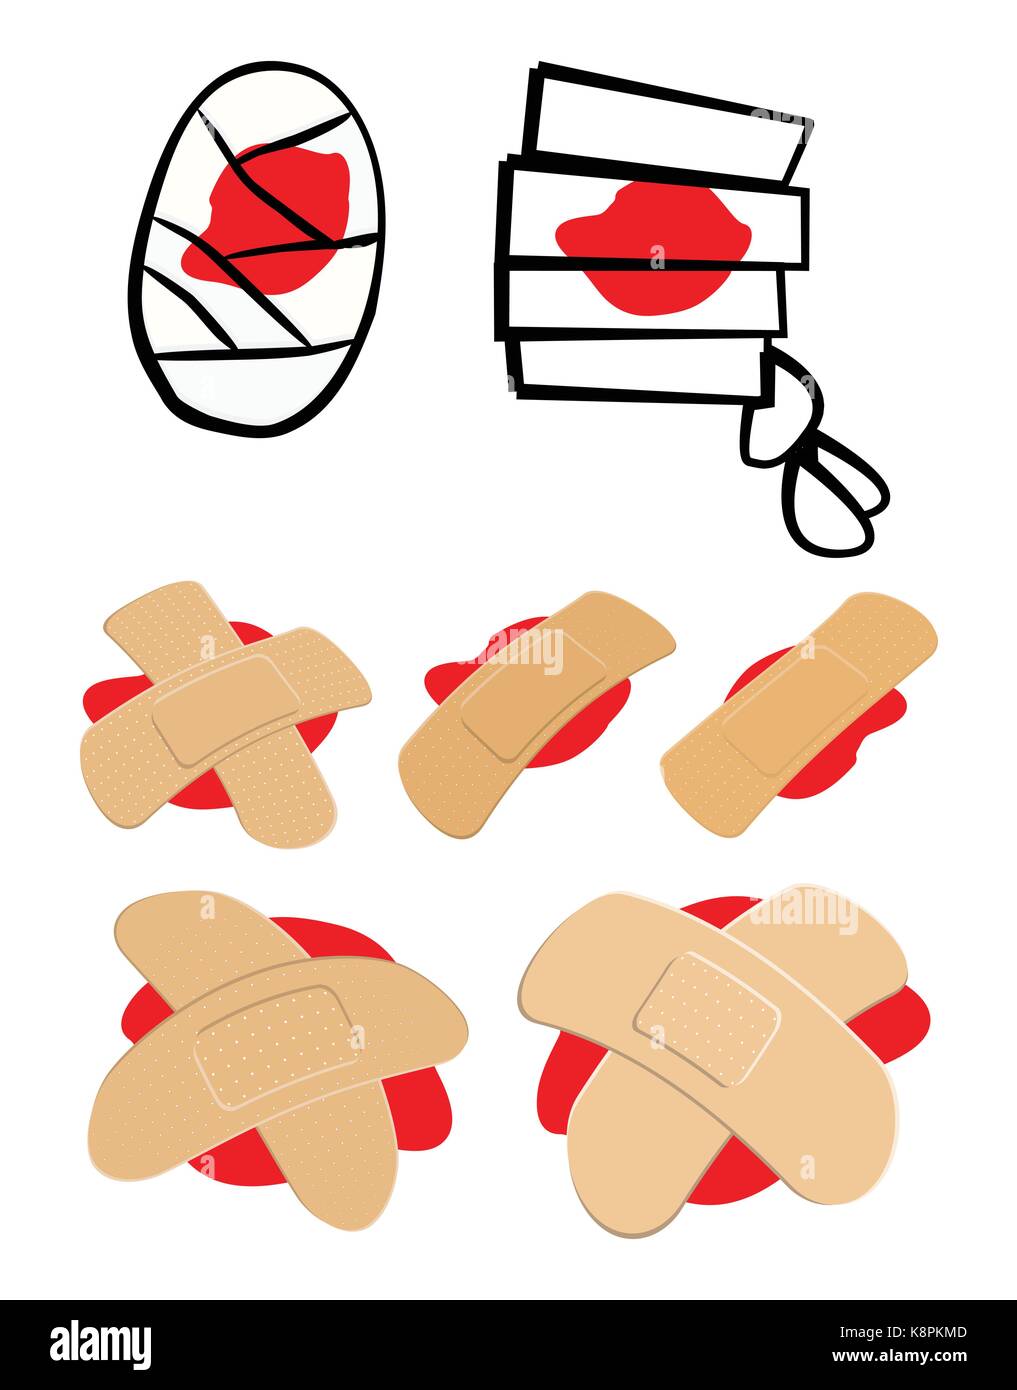 Set of Adhesive  plaster and bandage with red  blood puddle. Medical equipment in different shapes. Vector illustration isolated on white background. Stock Vector